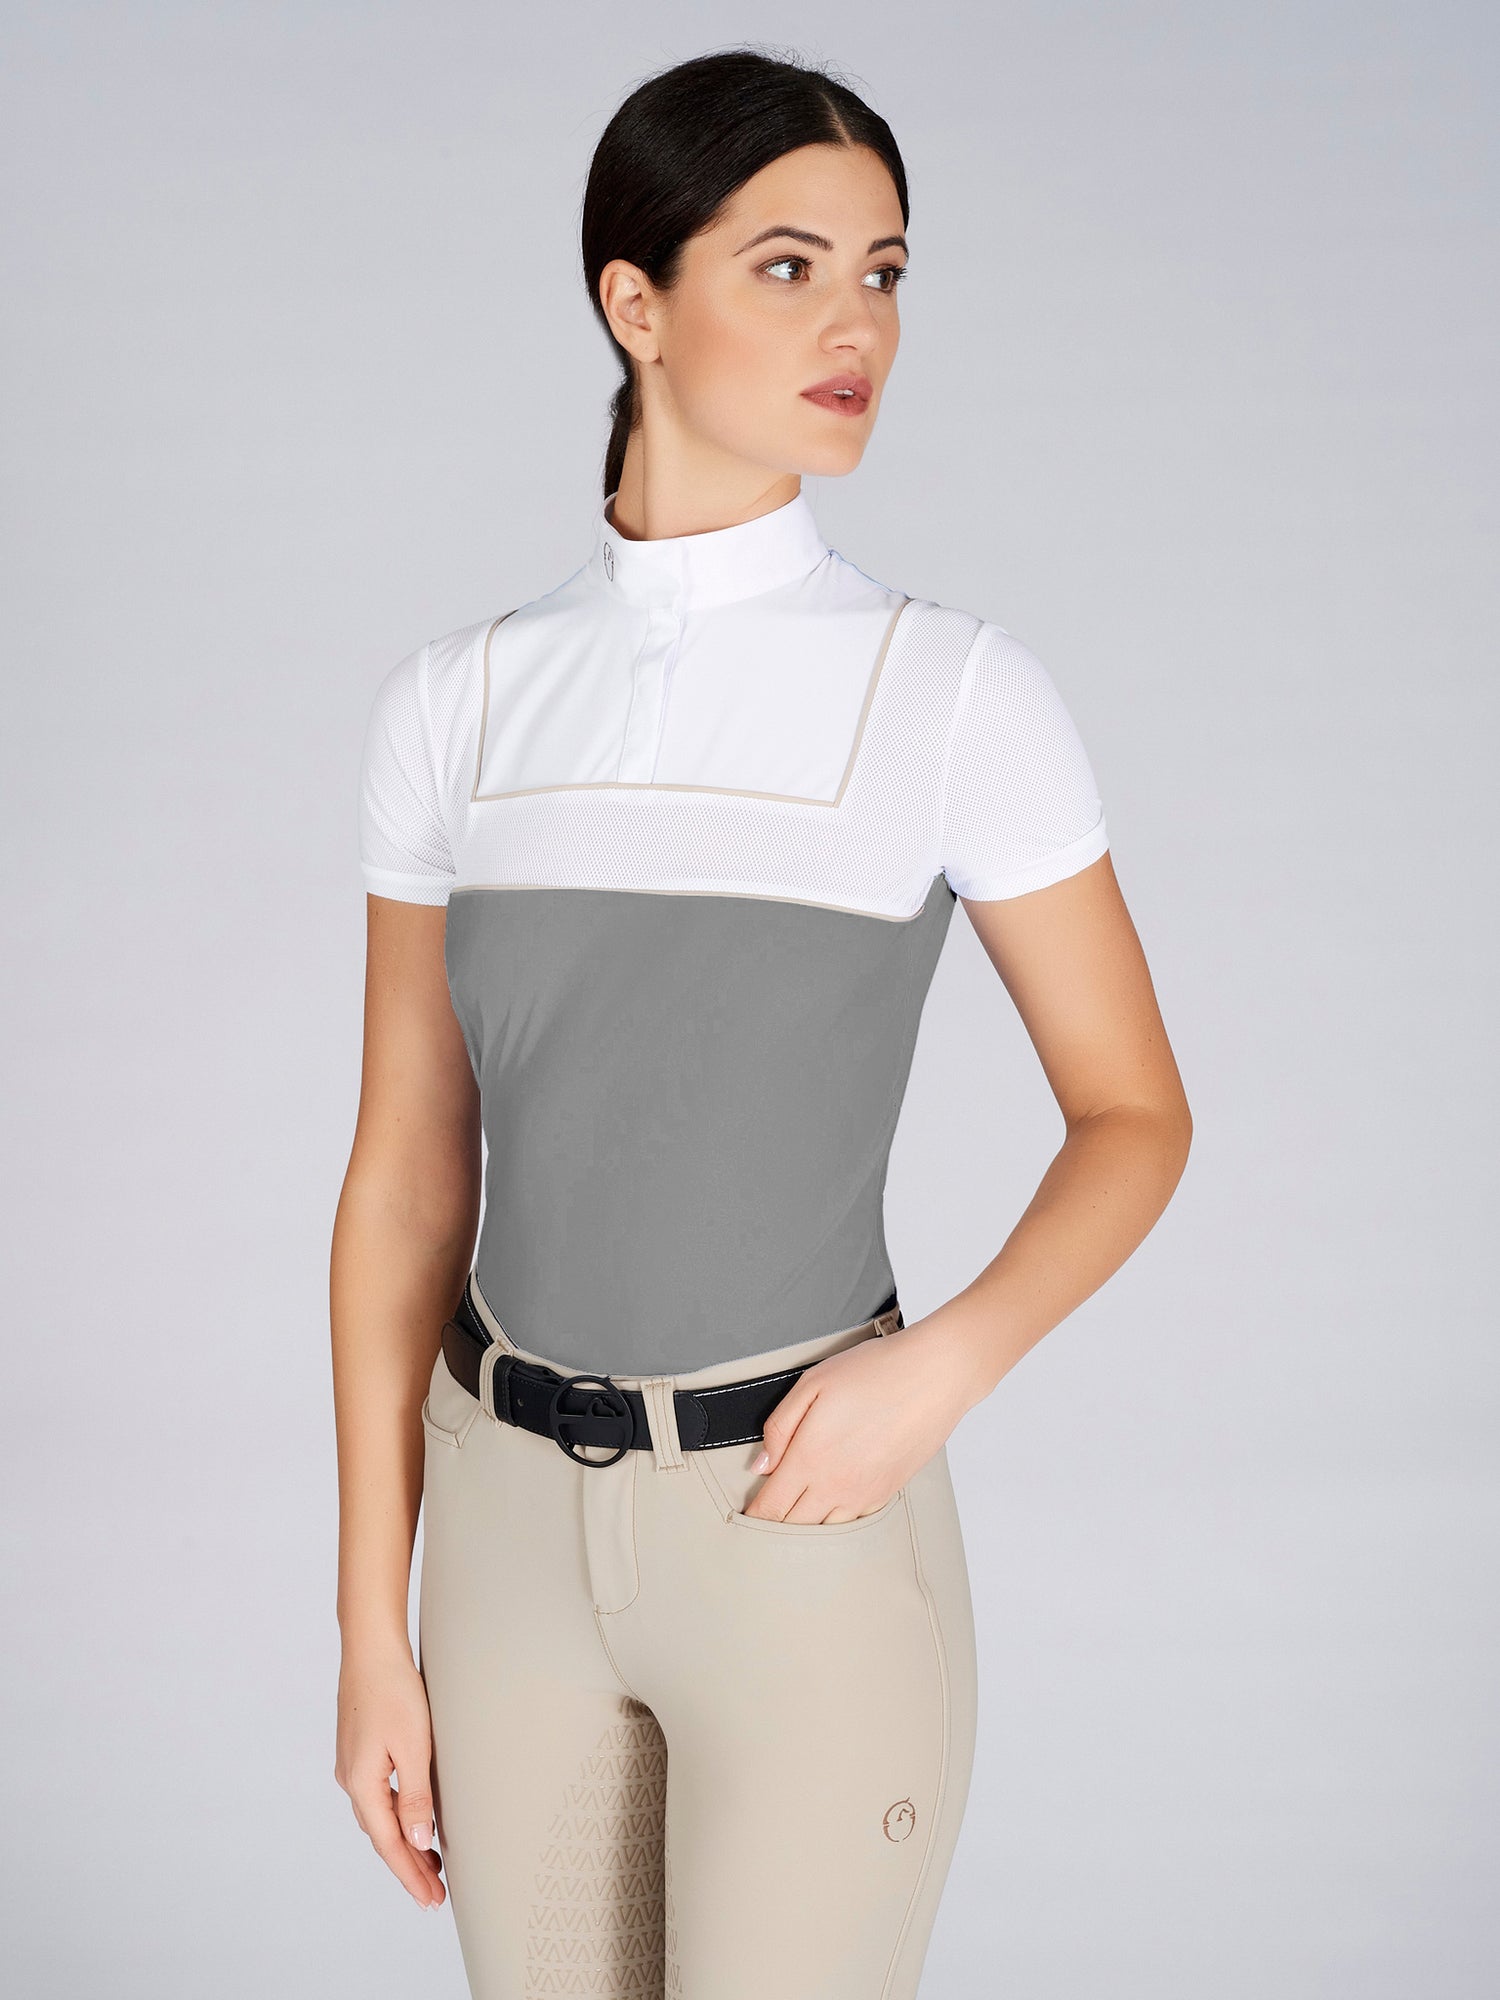 The Vestrum Bellaria Sage Show Shirt is stunning. The shirt is made from a luxury bi stretch jersey. The mesh insert in on stage sleeve and chest giving a modern twist. Beige piping insert to finish the look.  Coordinate with Vestrum beige and sage breeches and Canberra Navy jacket.